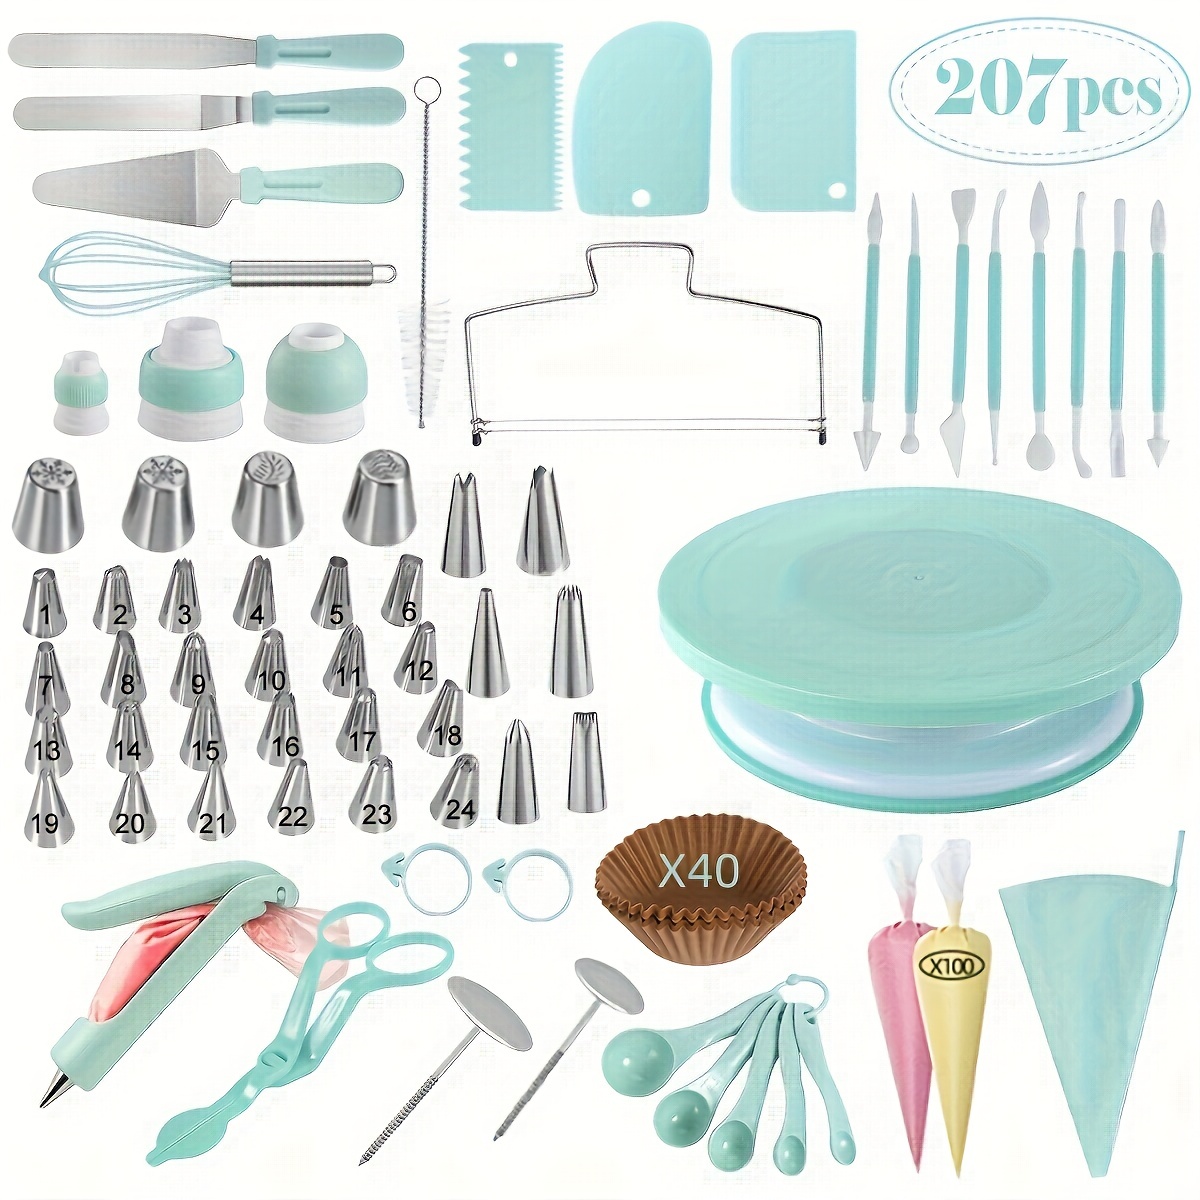 165-piece Set Cake Decorating Supplies Tips Kits Stainless Steel Baking  Supplies Icing Tips With Piping Pastry Bags Baking Tools Accessories 